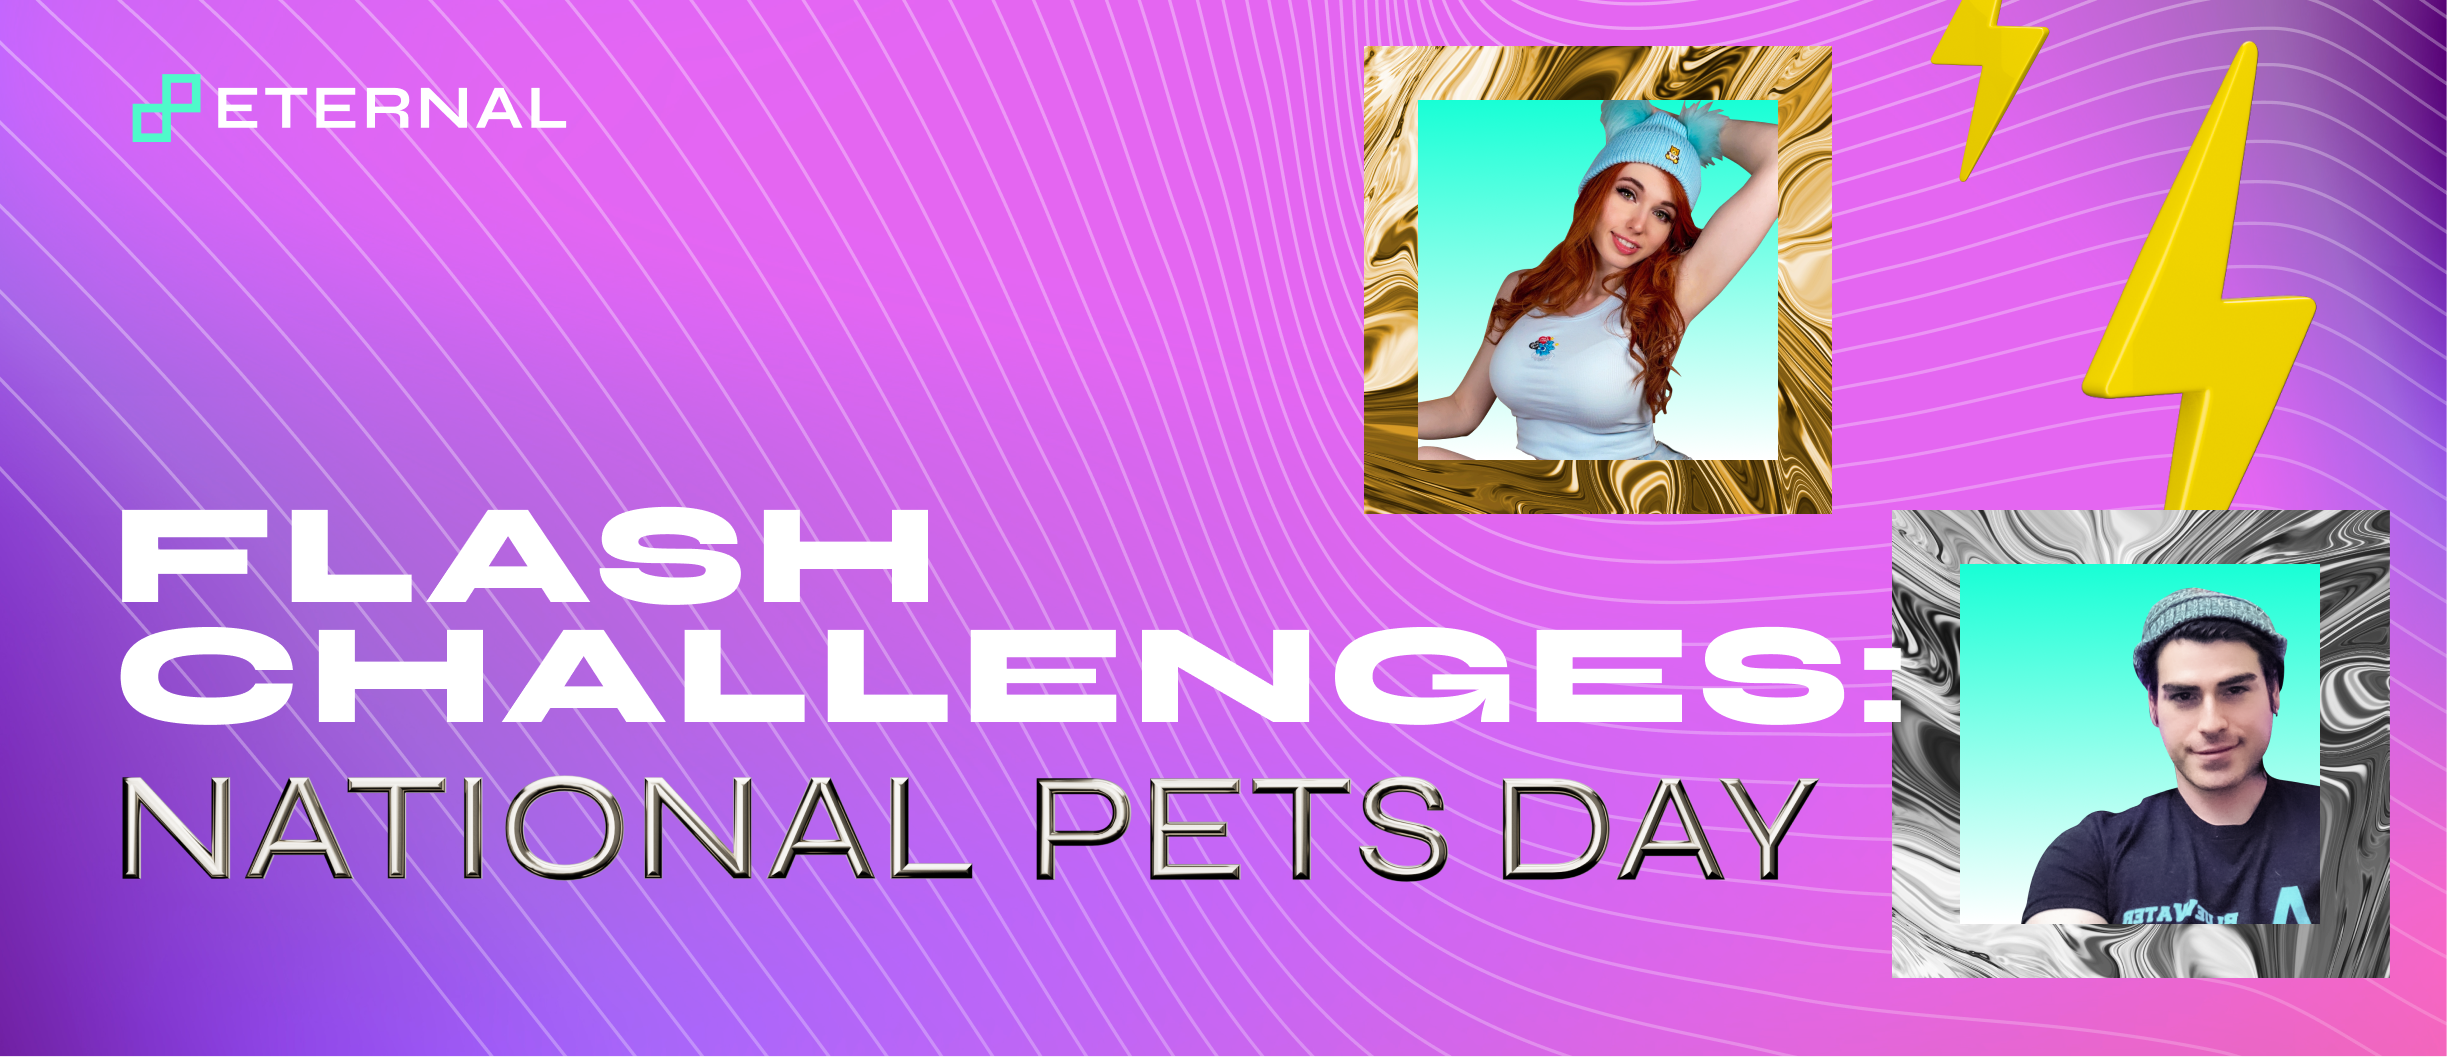 Flash Challenges: National Pets Day